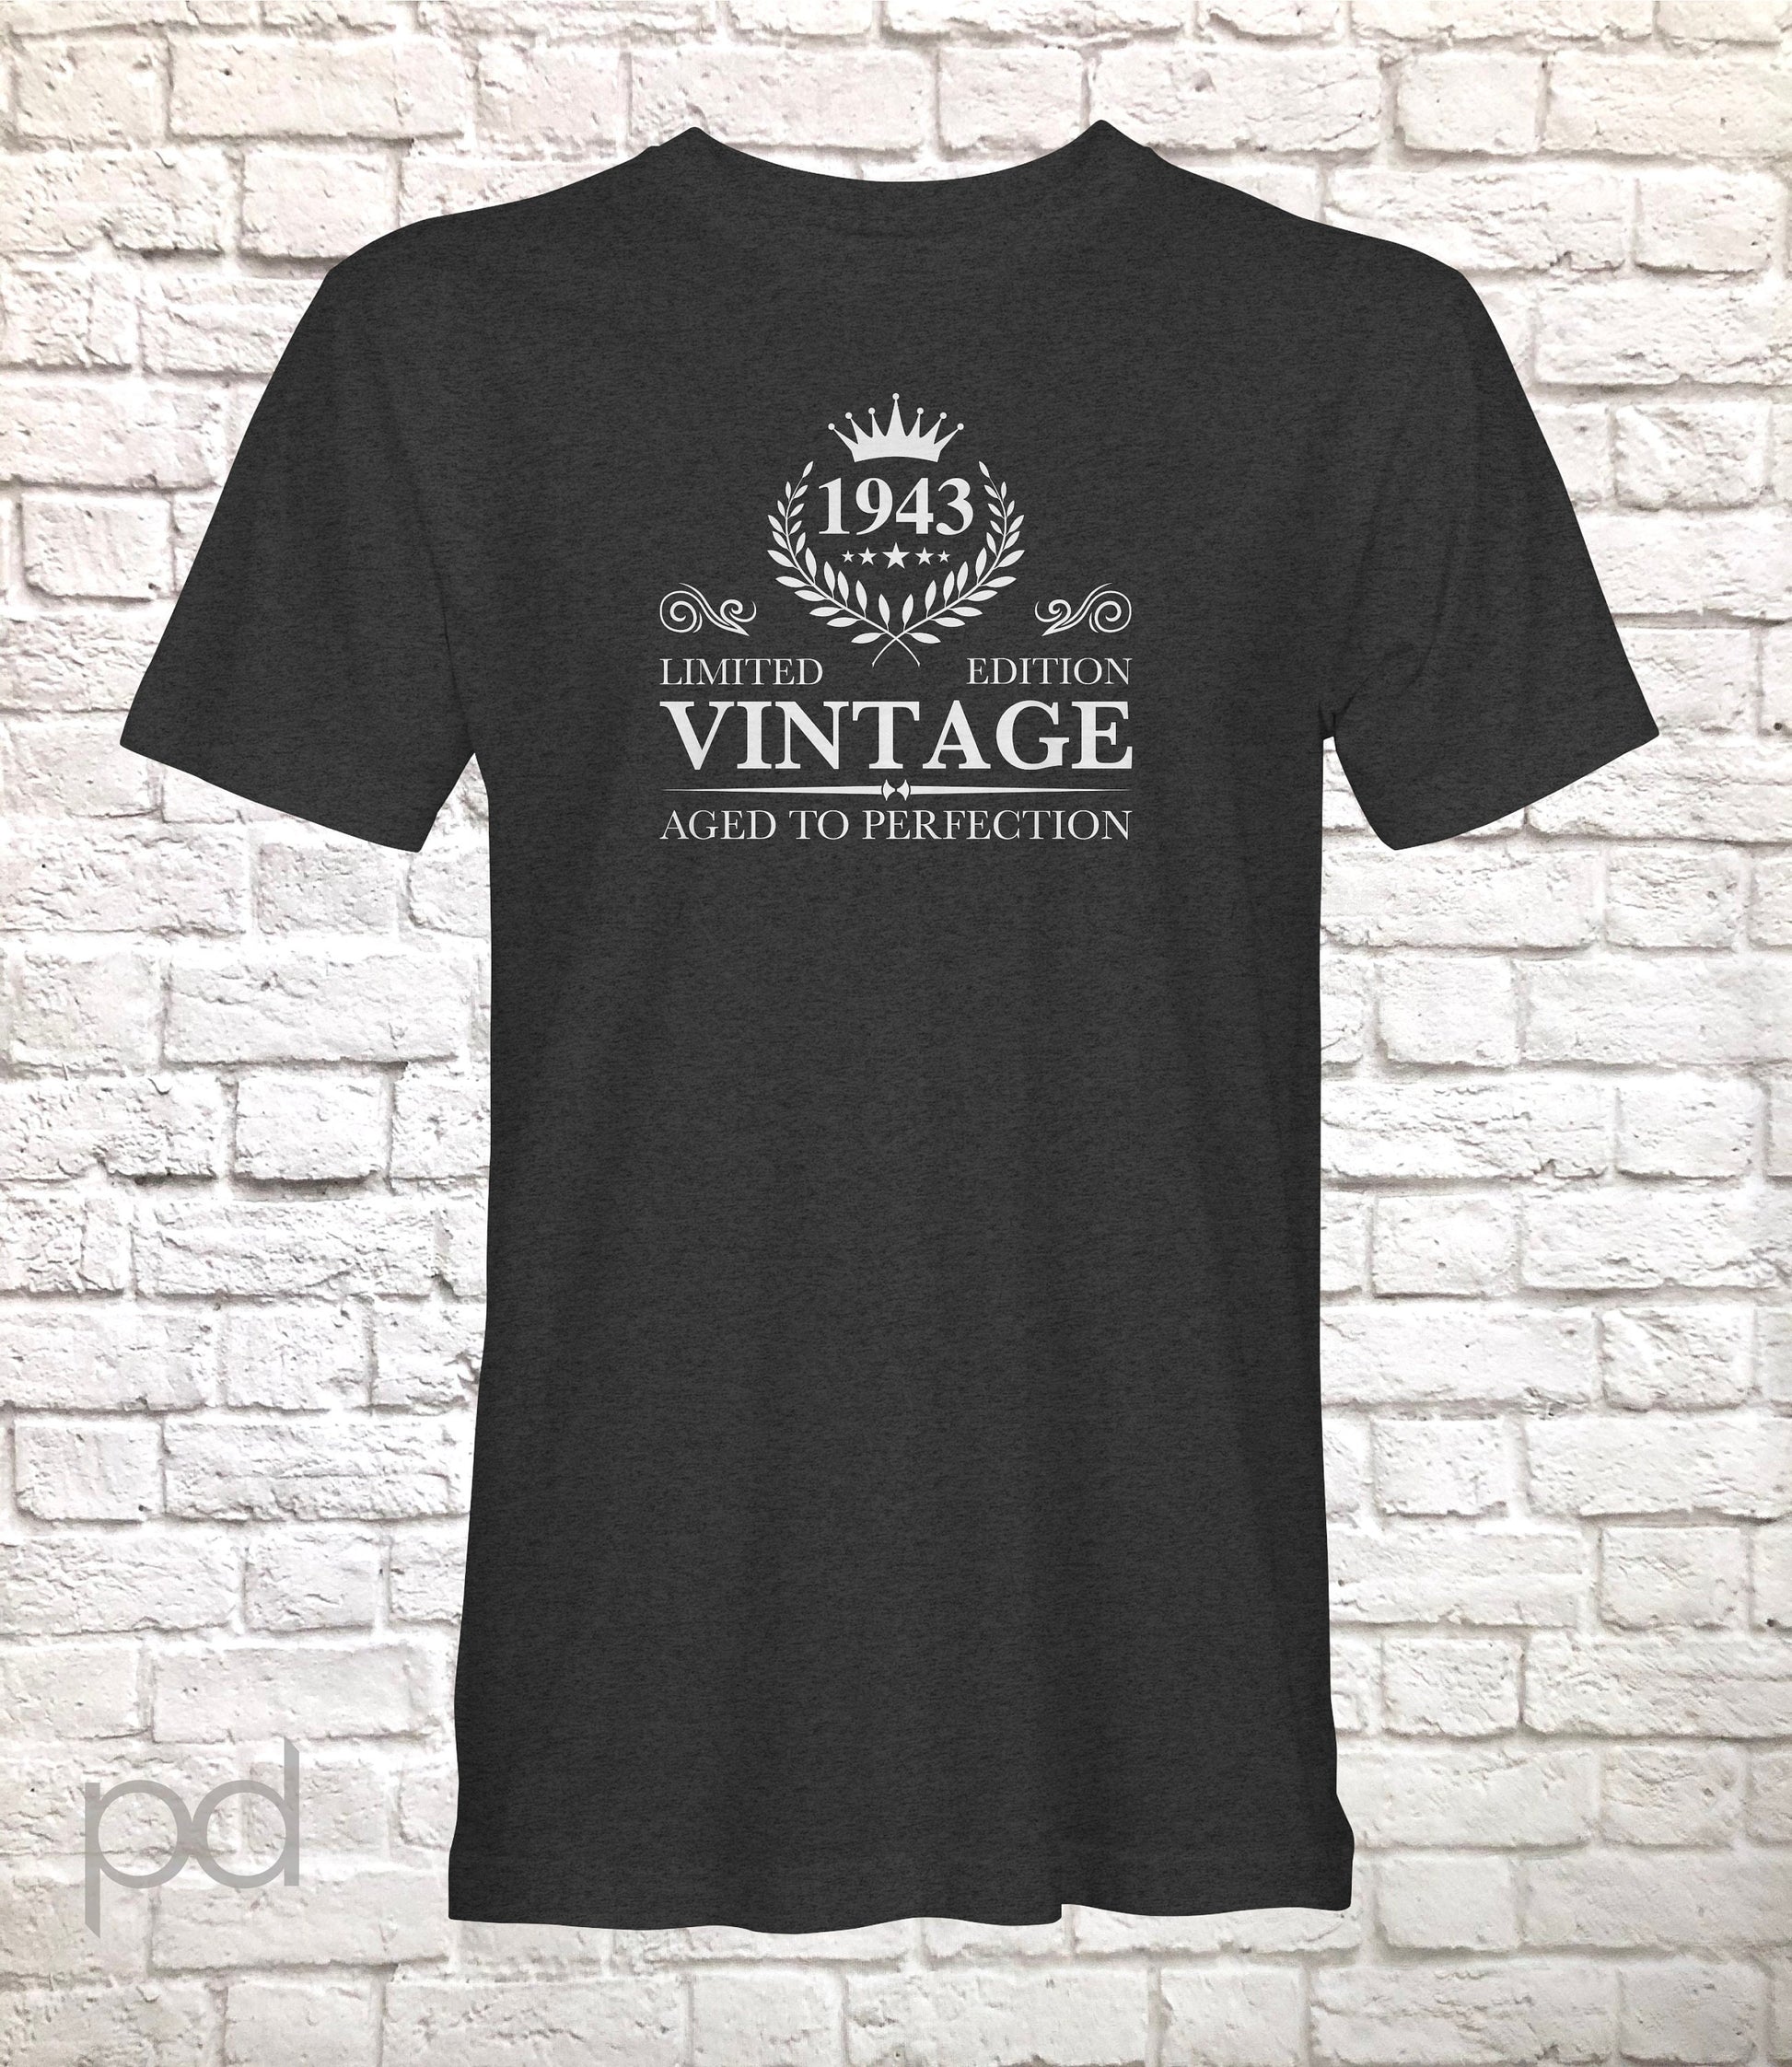 Birthday Year Gift, 1943 (ANY YEAR)  T Shirt, Vintage Aged To Perfection Men or Women Unisex Jersey Short Sleeve Tee Shirt Top